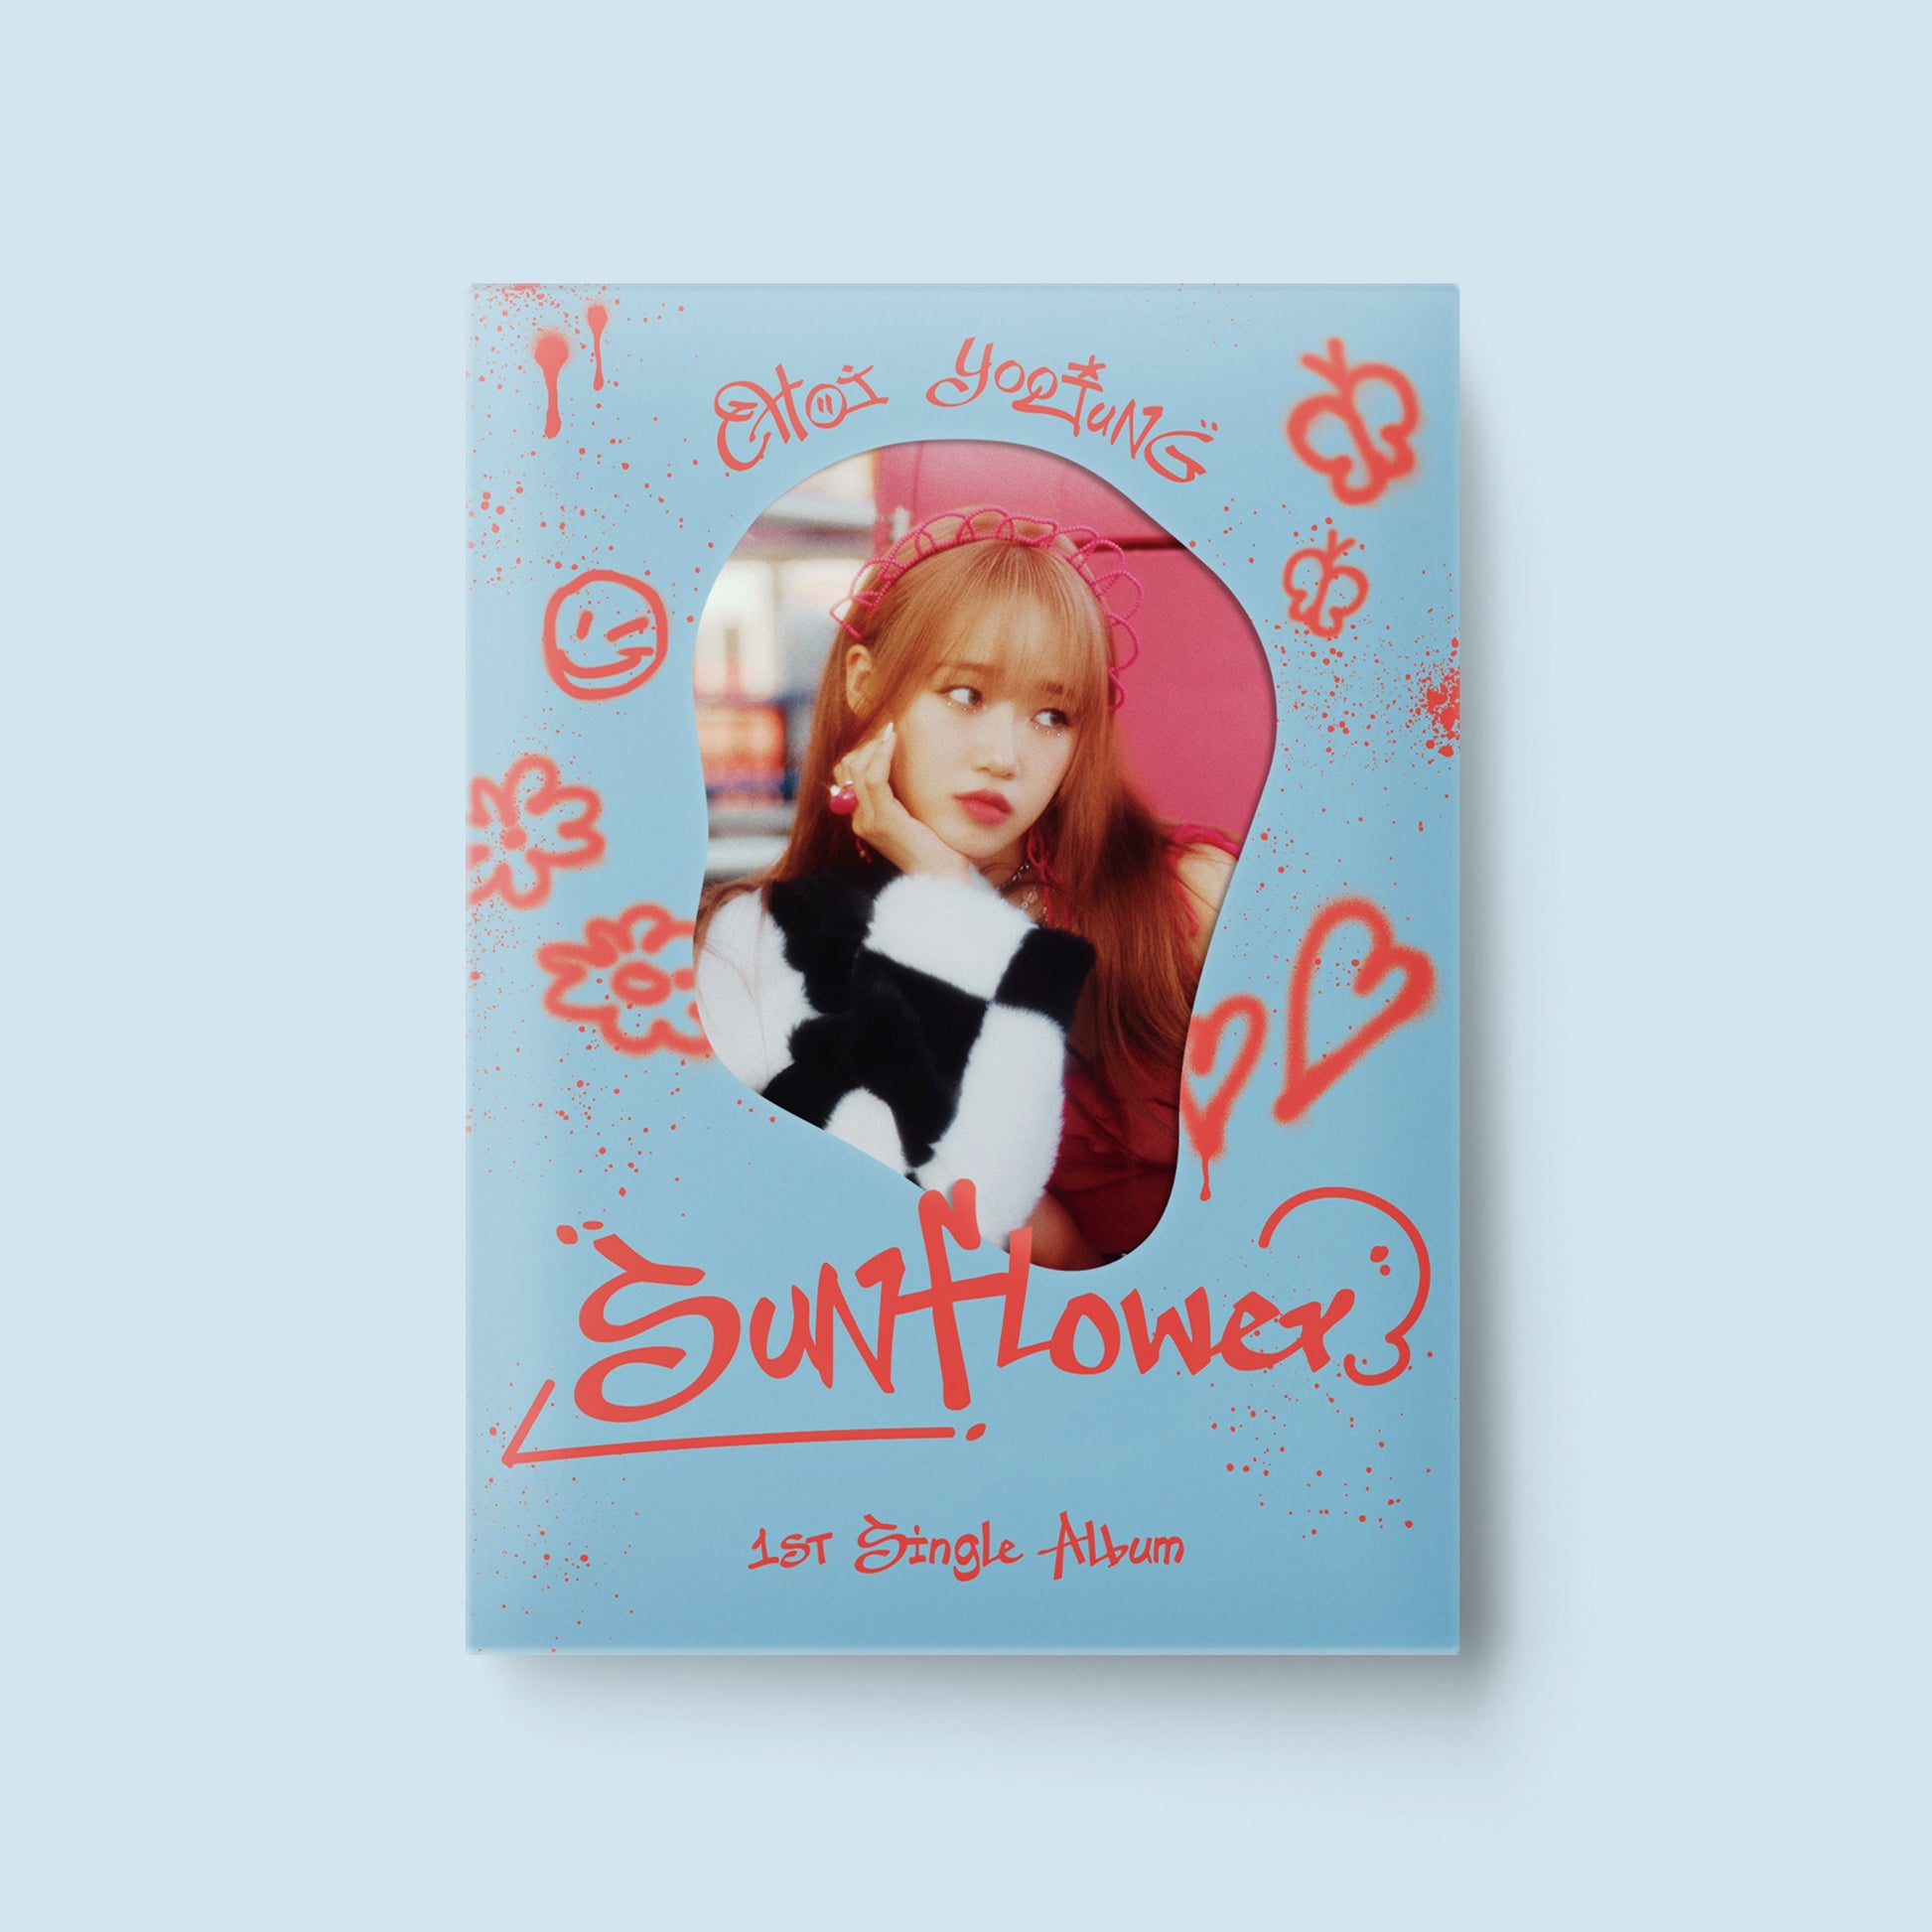  CHOI YOOJUNG 1ST SINGLE ALBUM 'SUNFLOWER' SWAG COVER